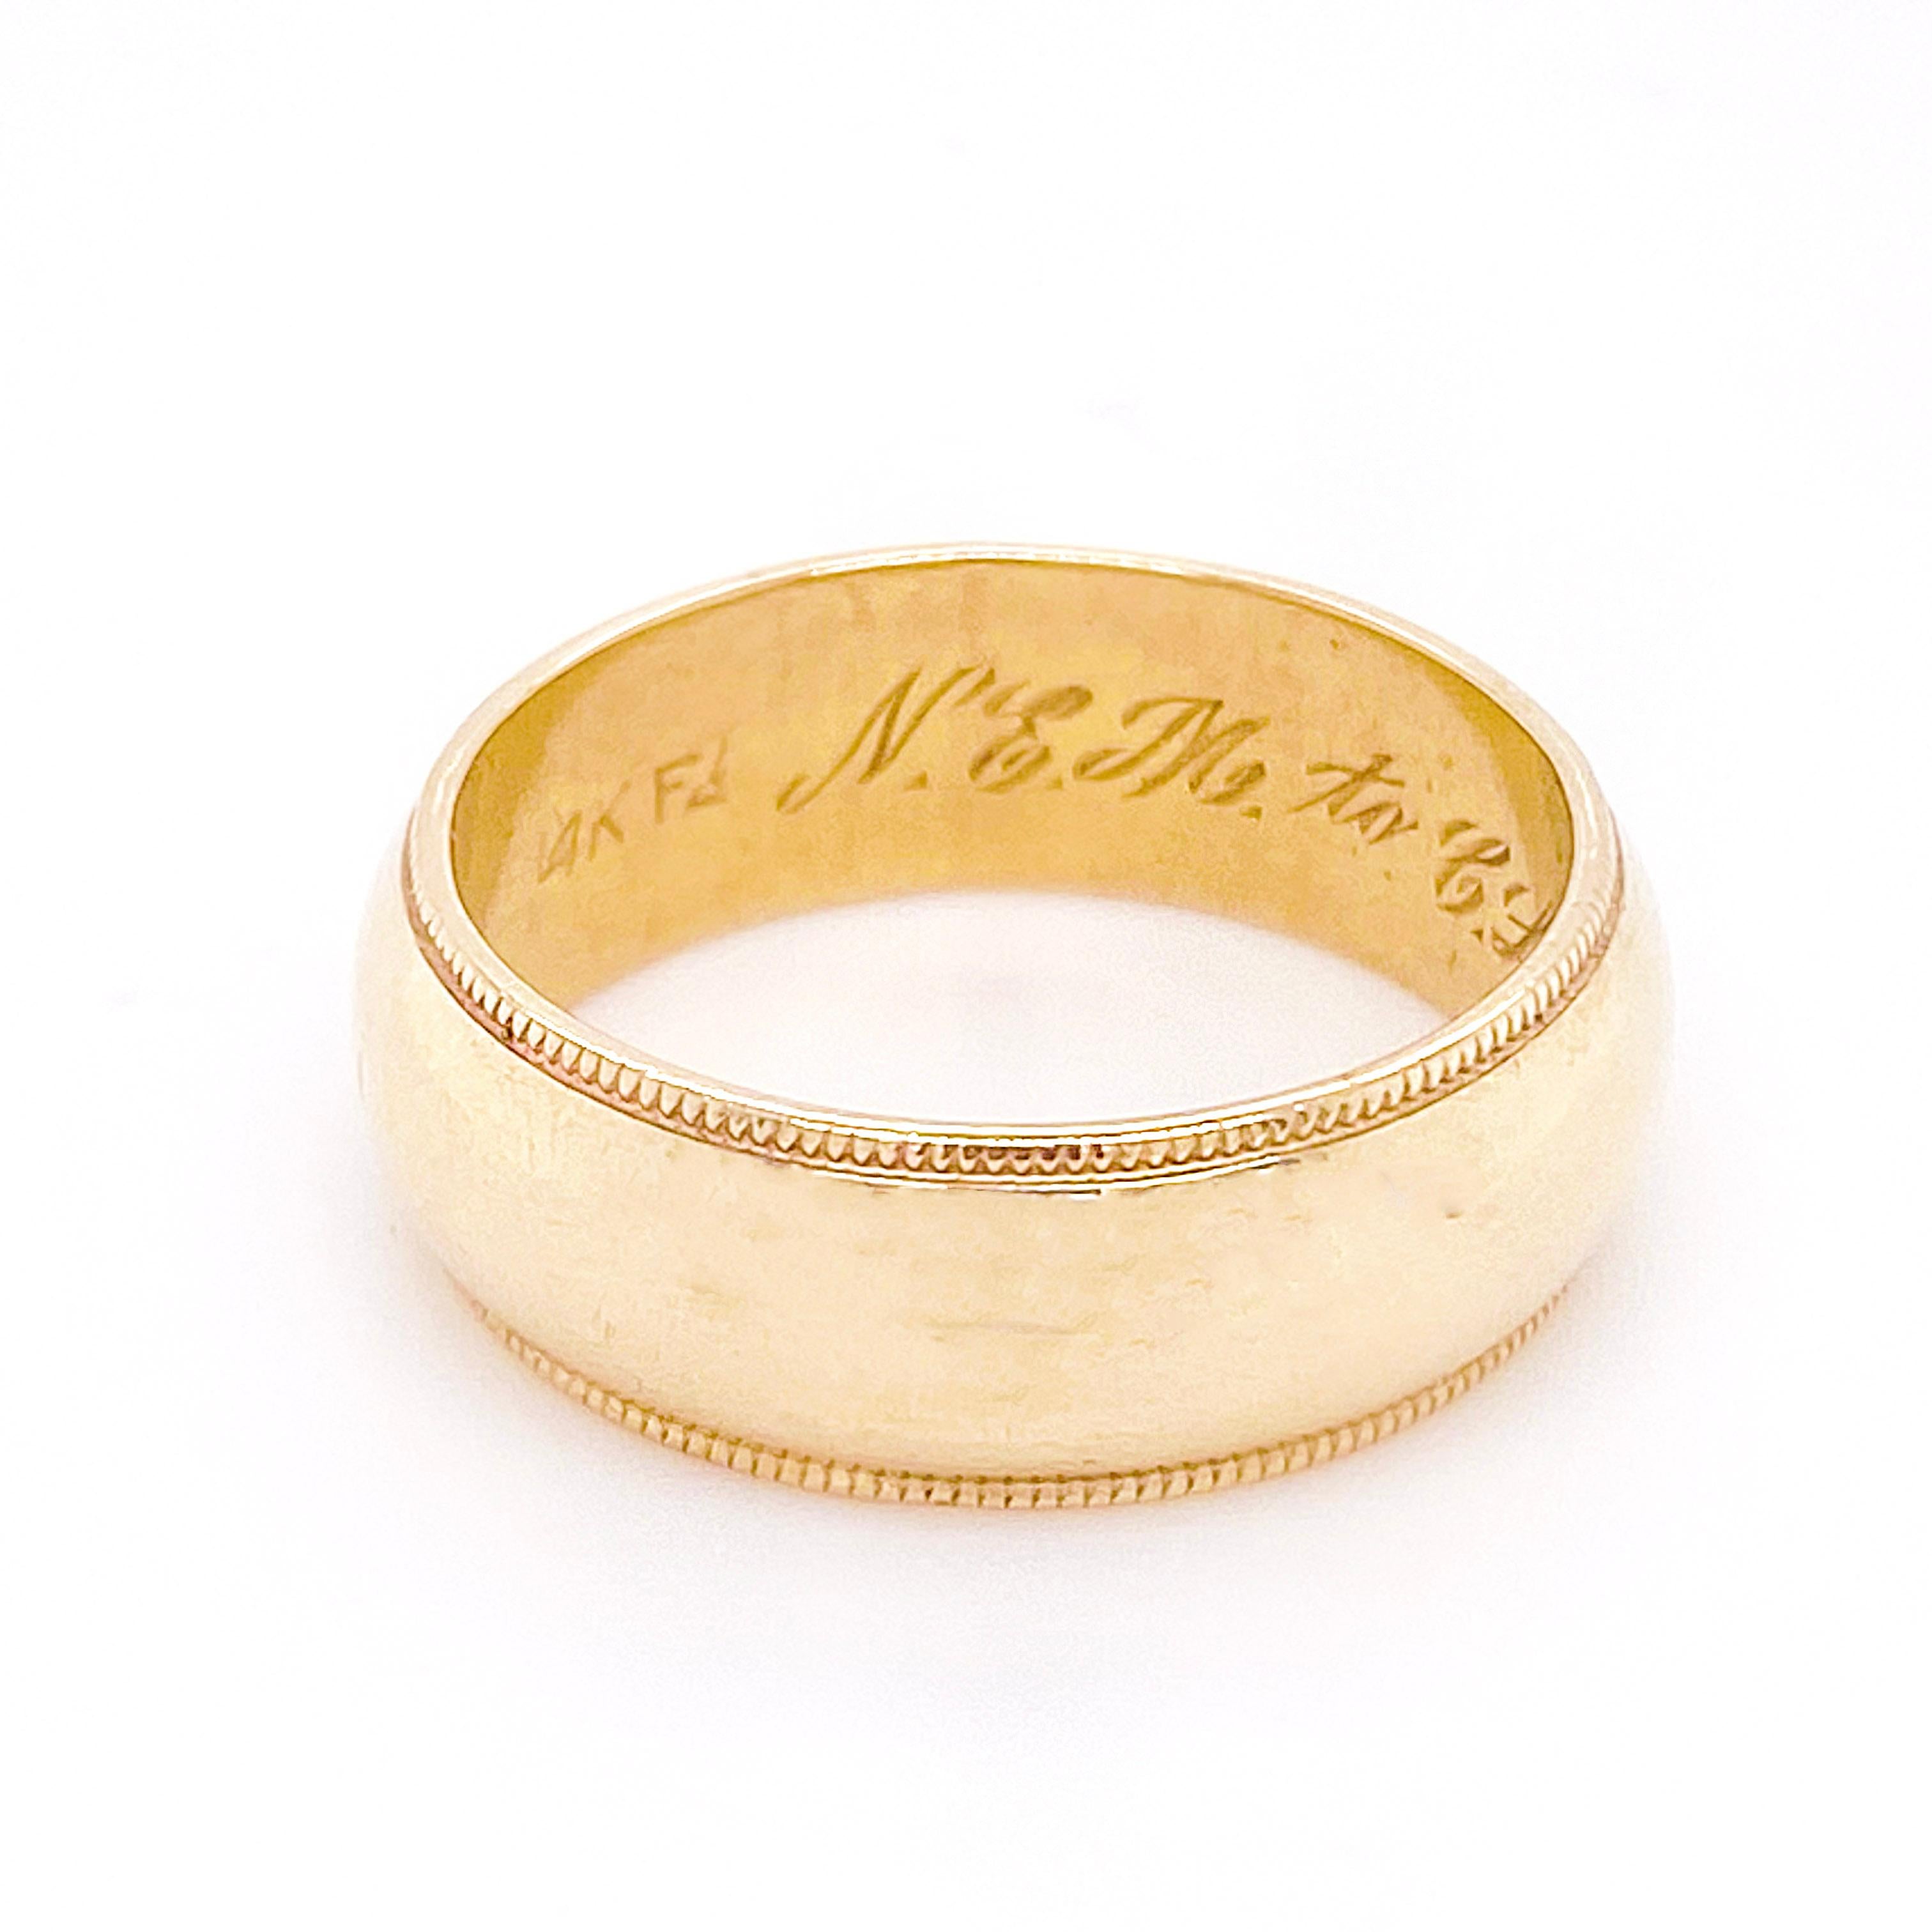 This is an estate wedding band from 1972. Own a piece of history and make it your own. This 14 karat yellow gold band is domed in the center and has a gorgeous beaded design on either side. The details for this stunning ring are listed below:
Metal